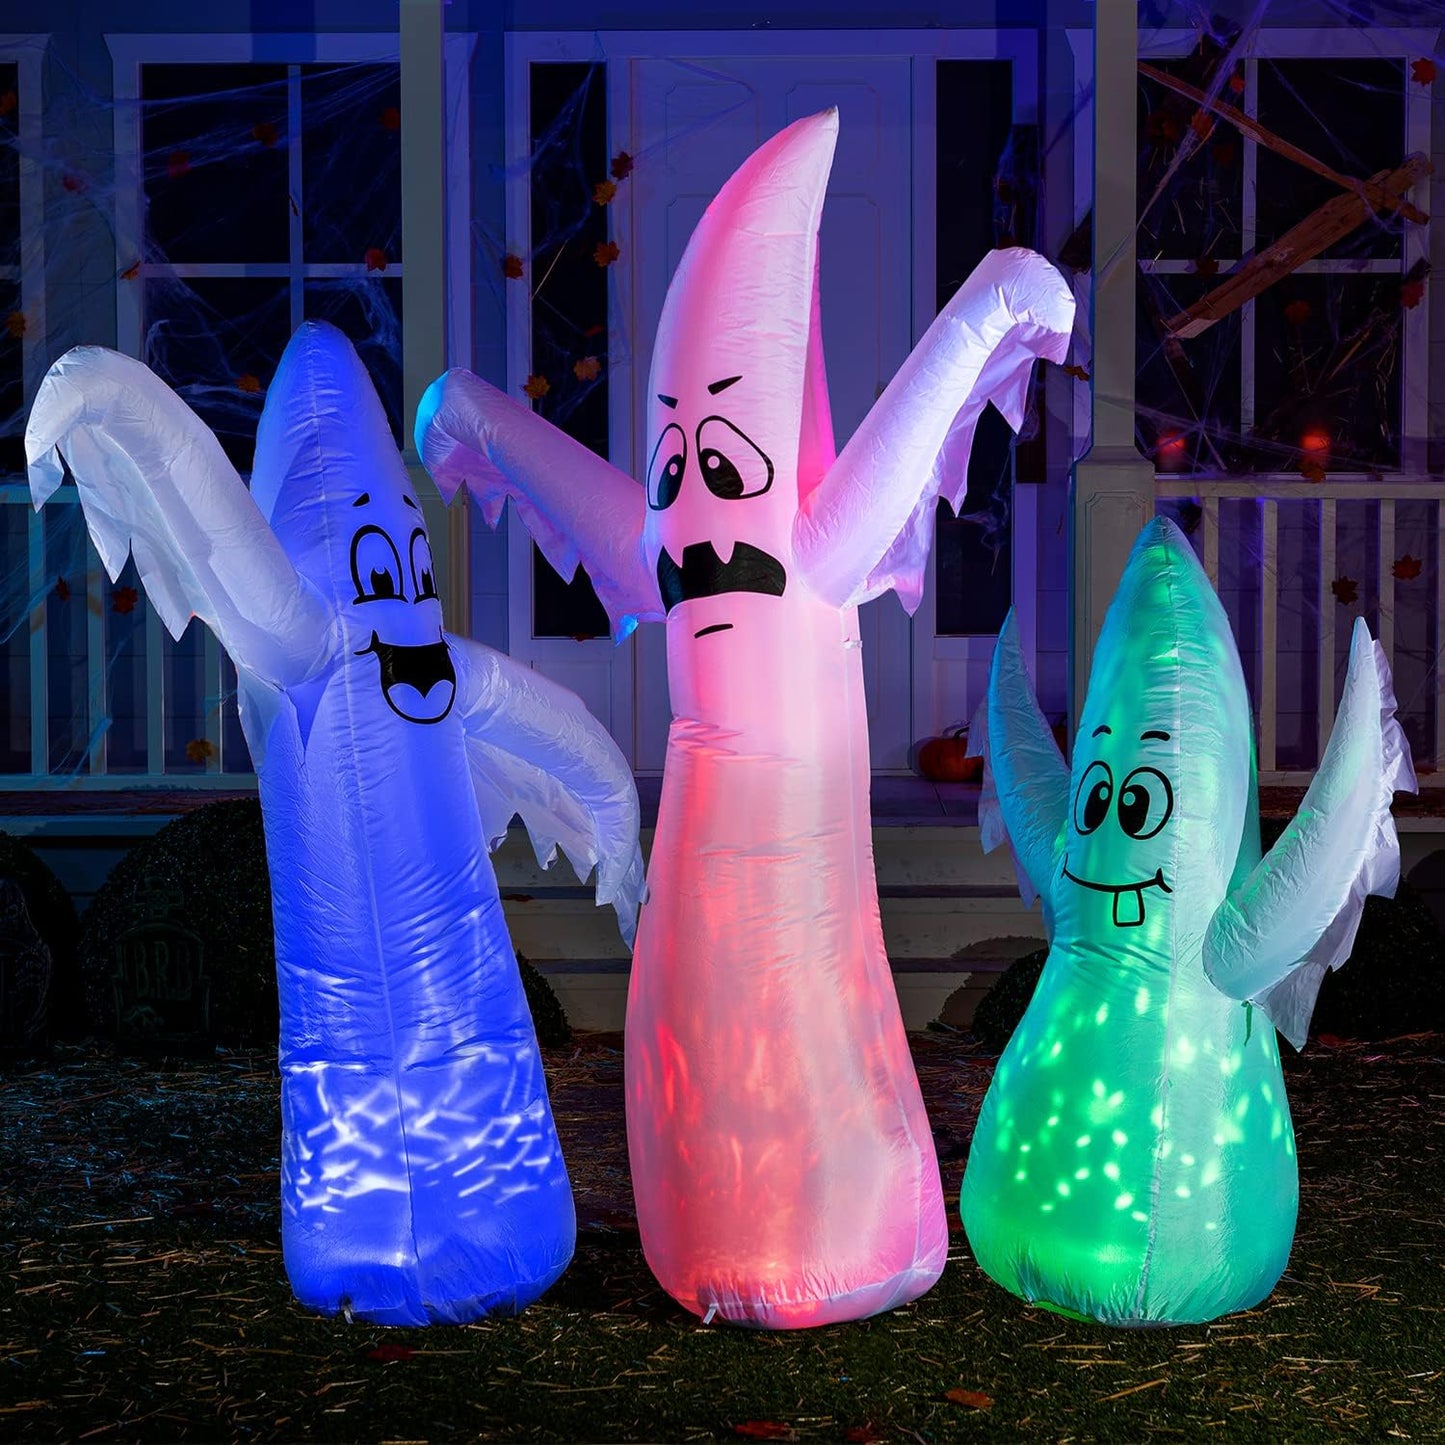 3 in 1 Halloween Cute Ghosts Inflatable - 6ft 5ft & 4ft